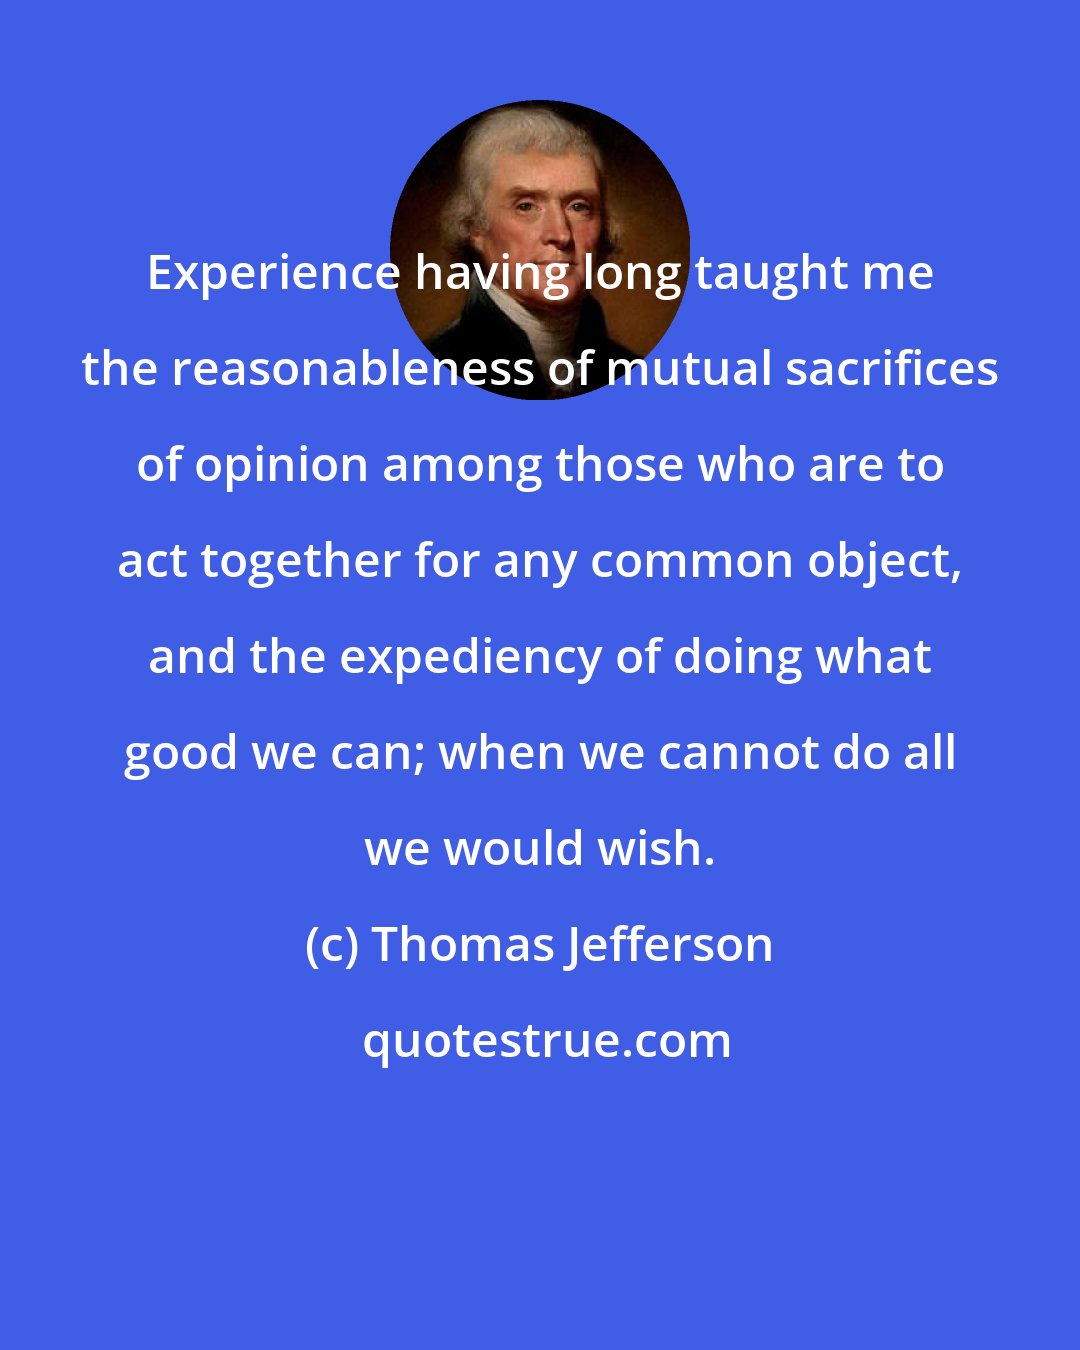 Thomas Jefferson: Experience having long taught me the reasonableness of mutual sacrifices of opinion among those who are to act together for any common object, and the expediency of doing what good we can; when we cannot do all we would wish.